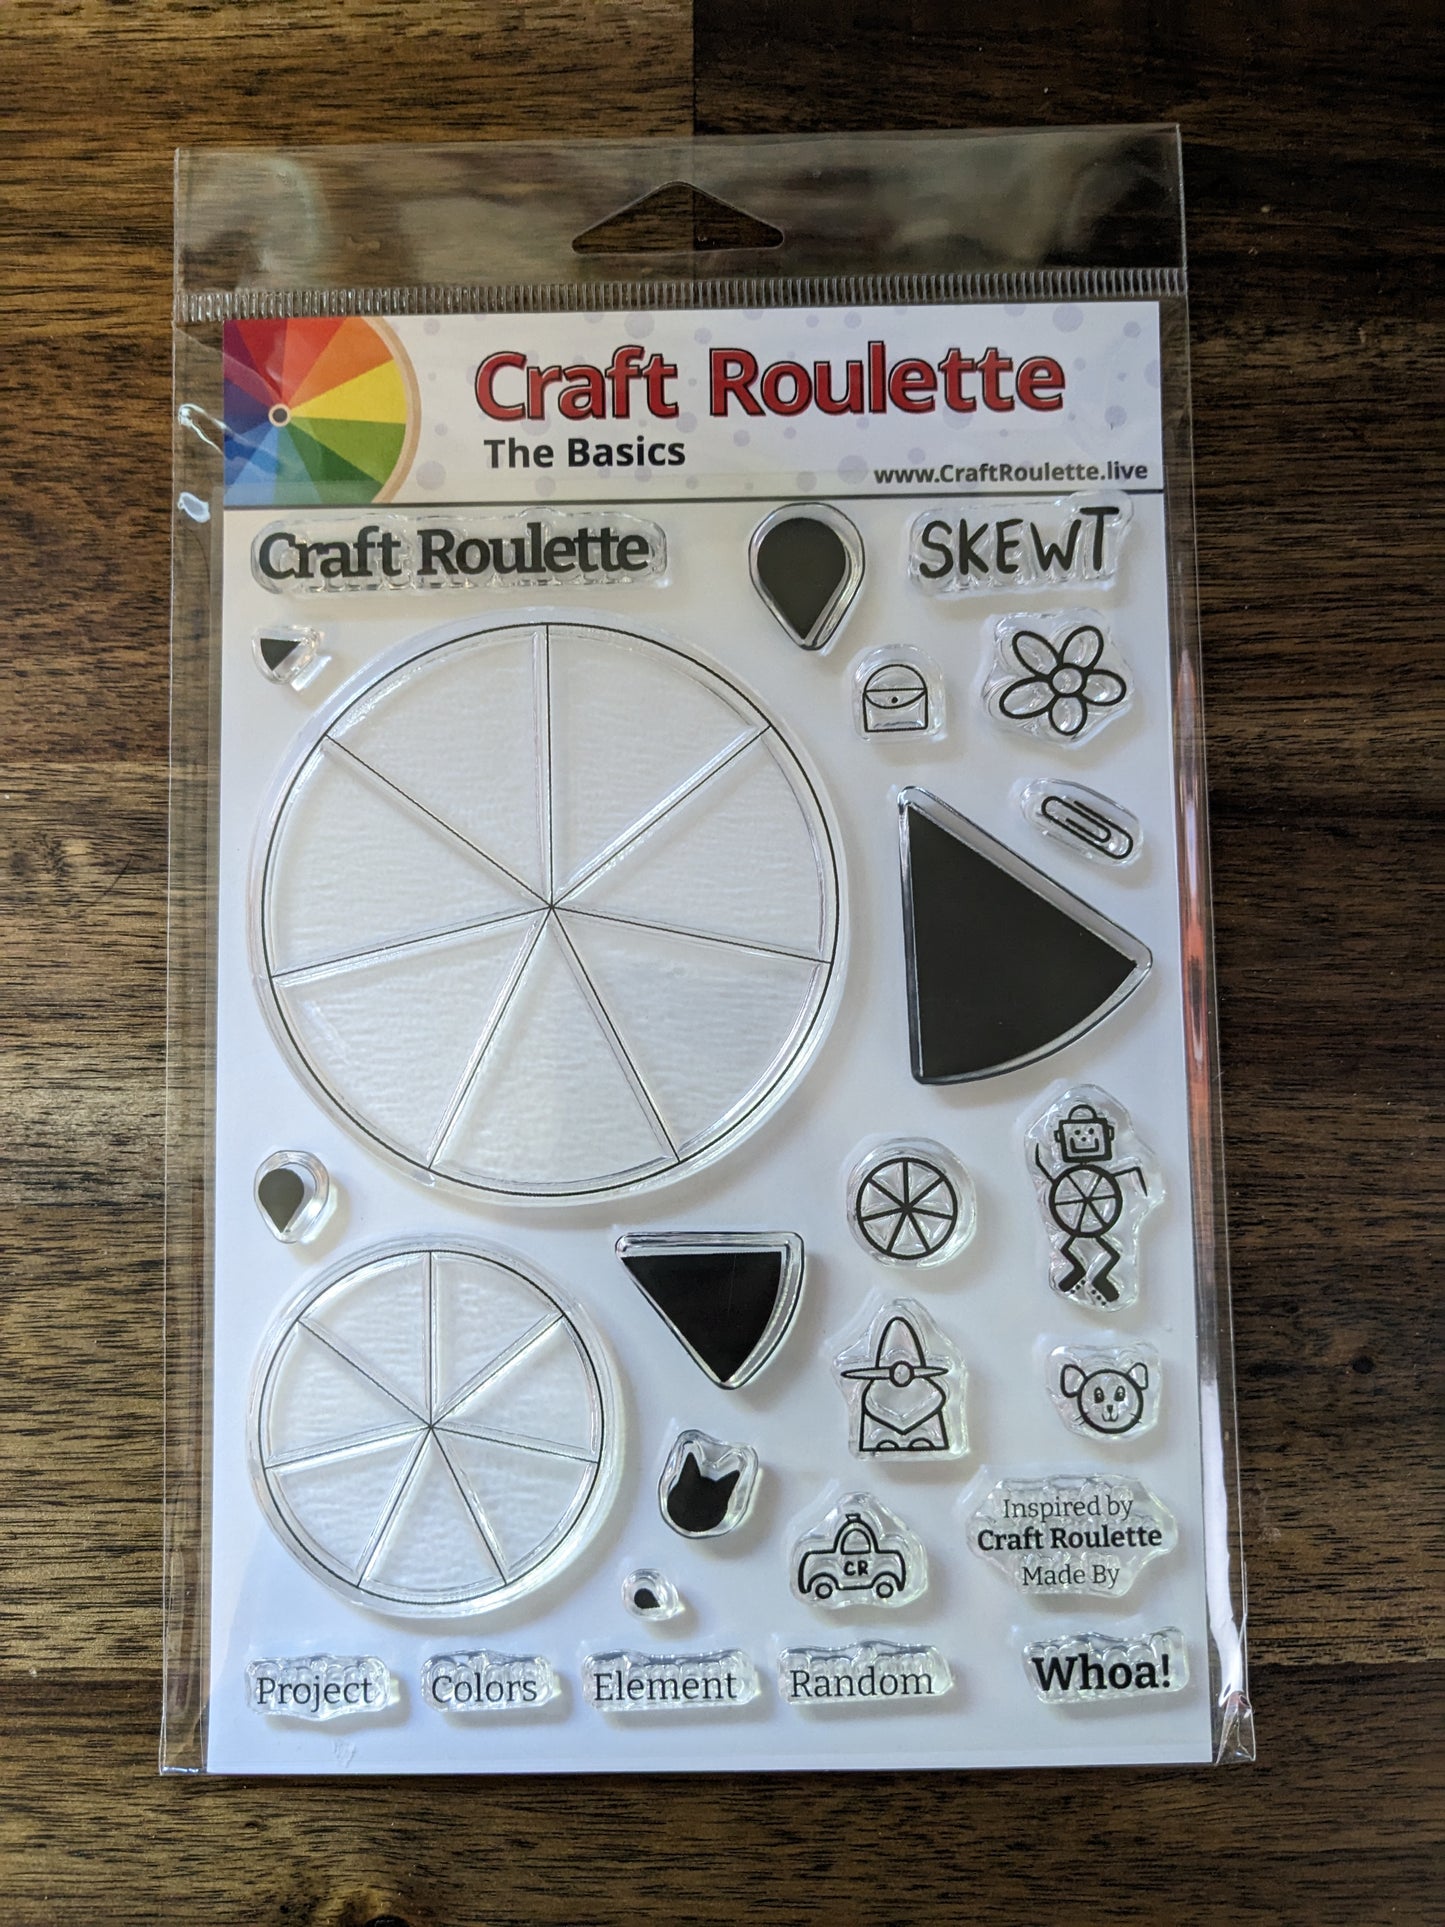 The Basics - A stamp set by Craft Roulette